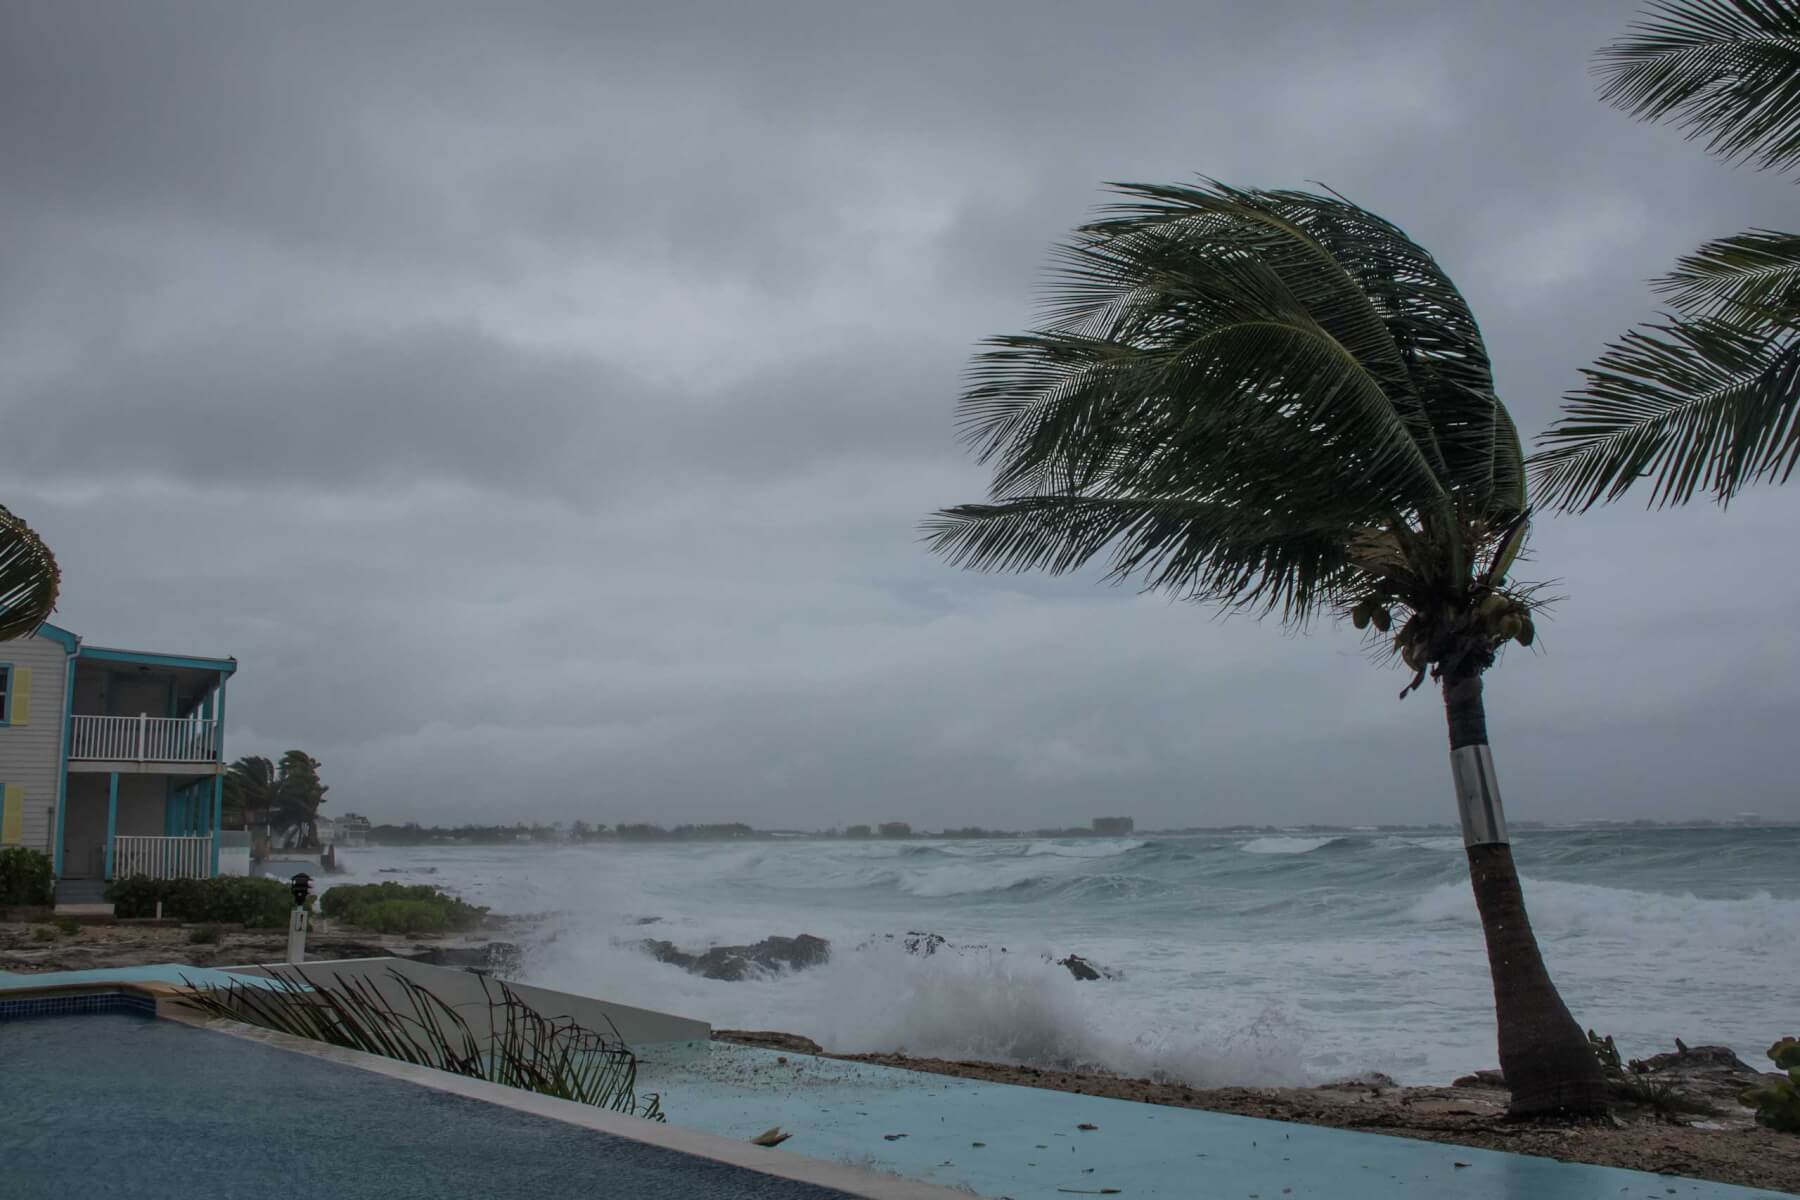 A palm tree getting blown around by a hurricane as waves crash onto the shore nearby